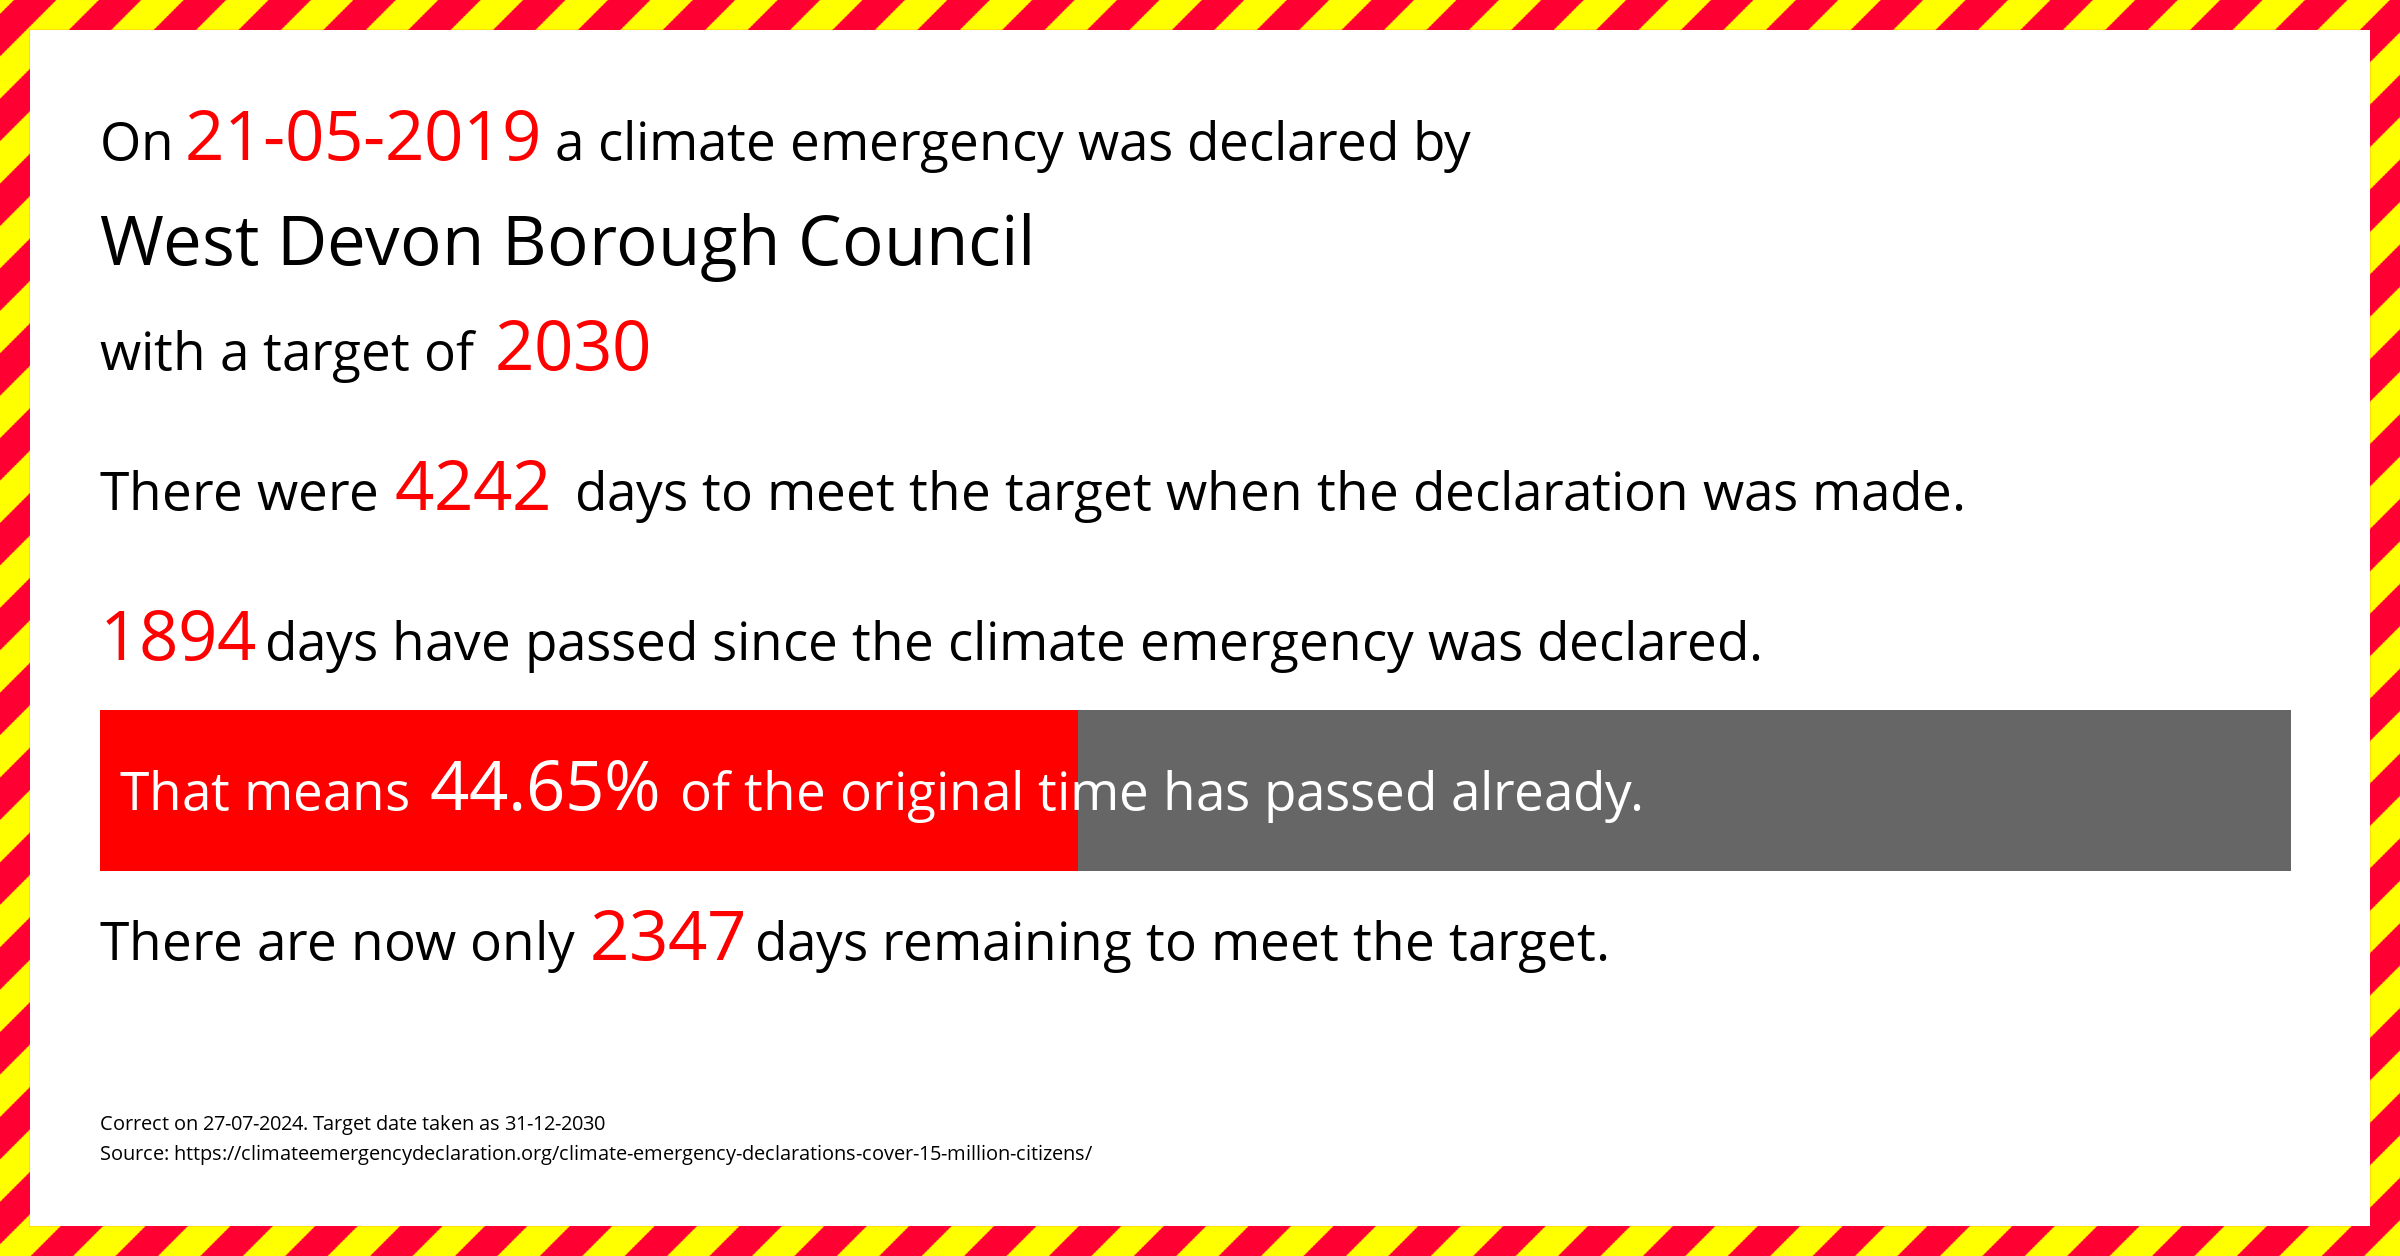 West Devon Borough Council declared a Climate emergency on Tuesday 21st May 2019, with a target of 2030.